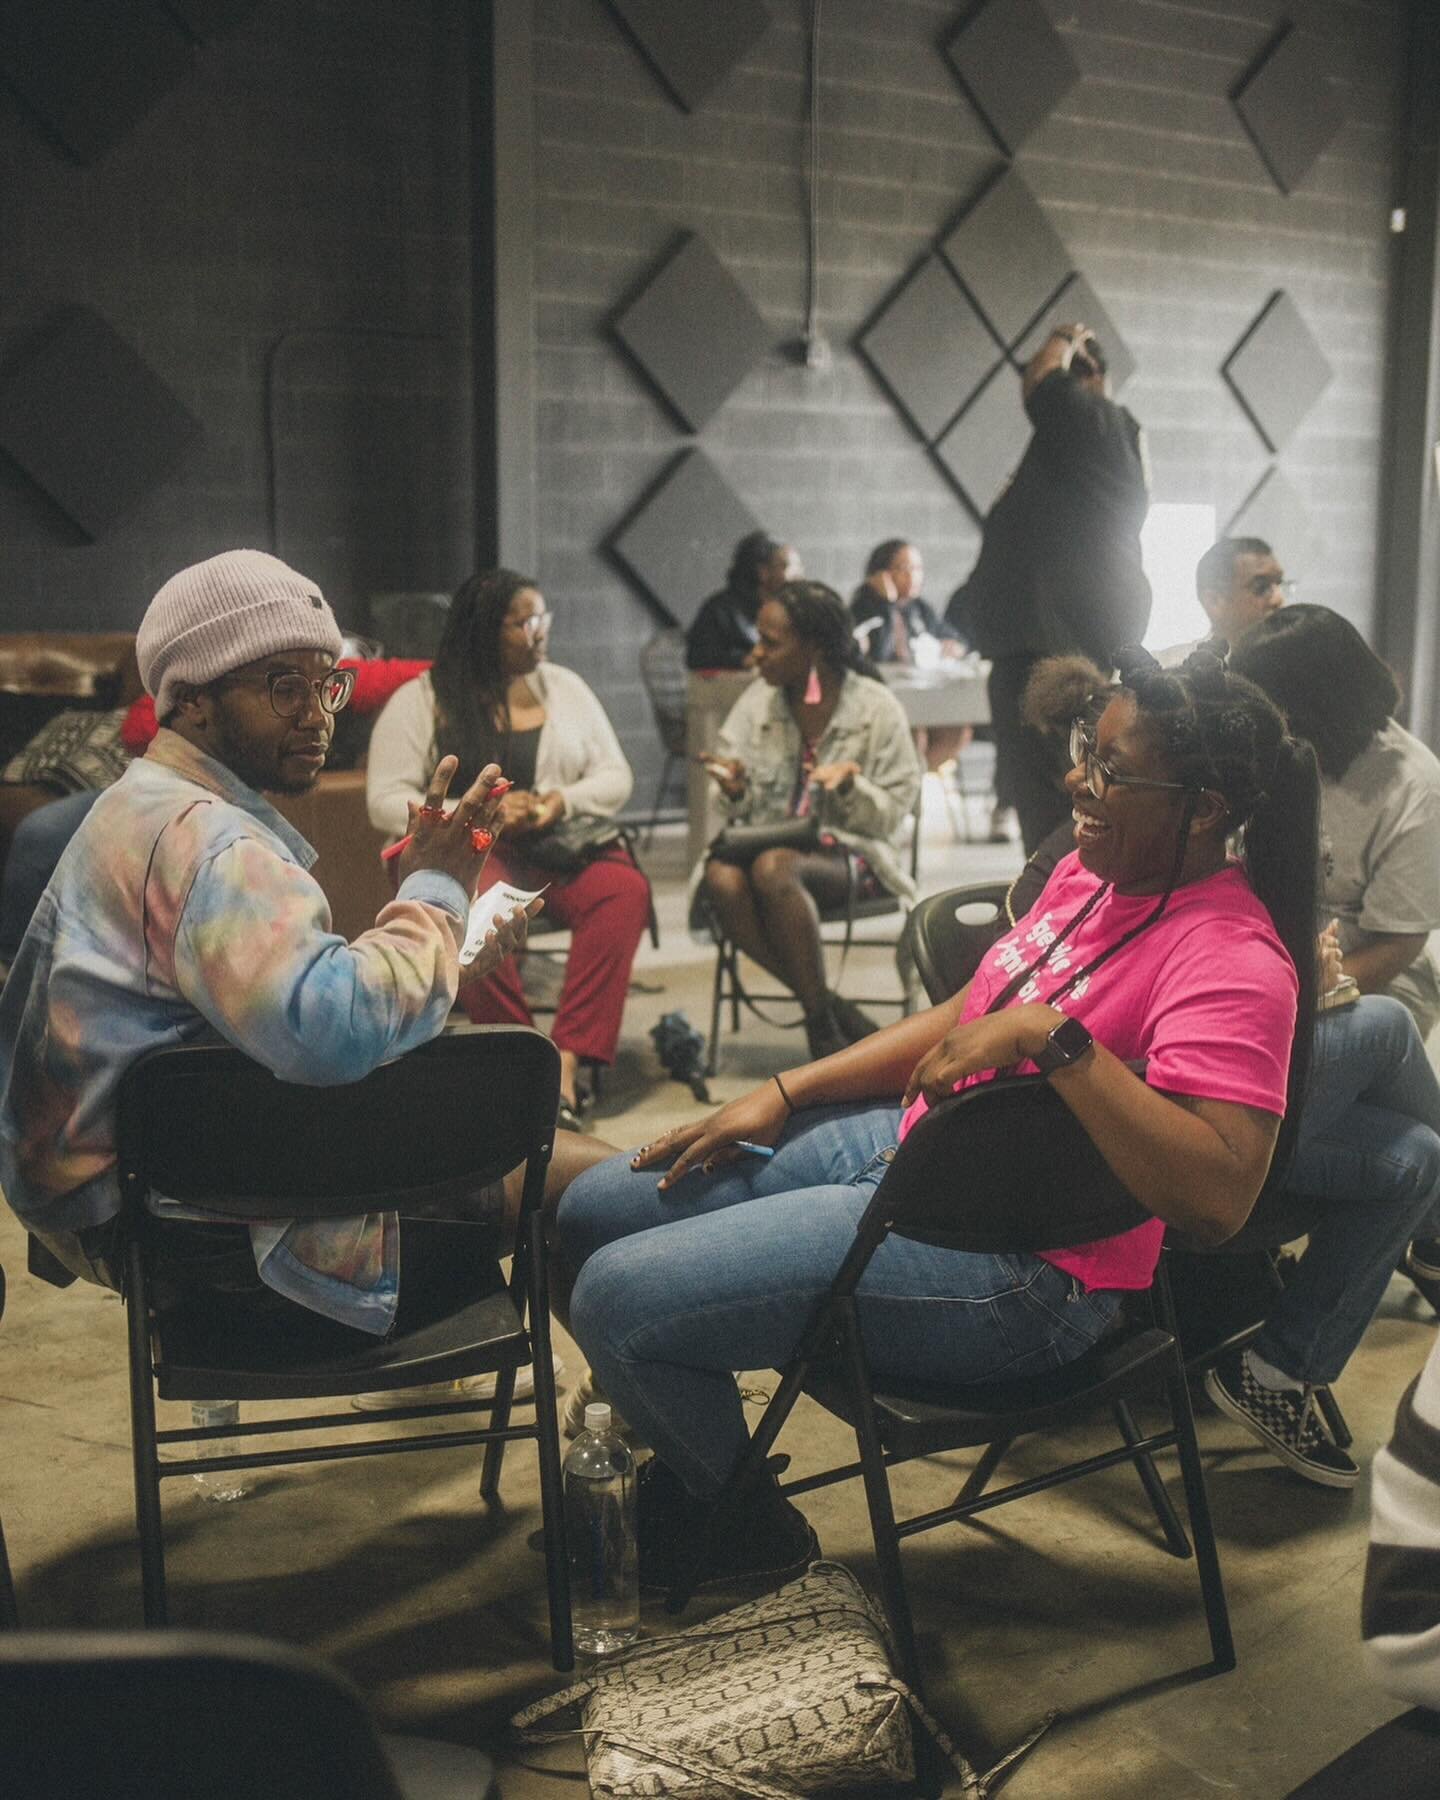 Have you registered for our April 6 Mass Meeting? We would love for you to join us. Our mass meetings are a great place to start if you're interested in getting more involved/giving back to your community. RSVP at blacknashvilleassembly.org/events